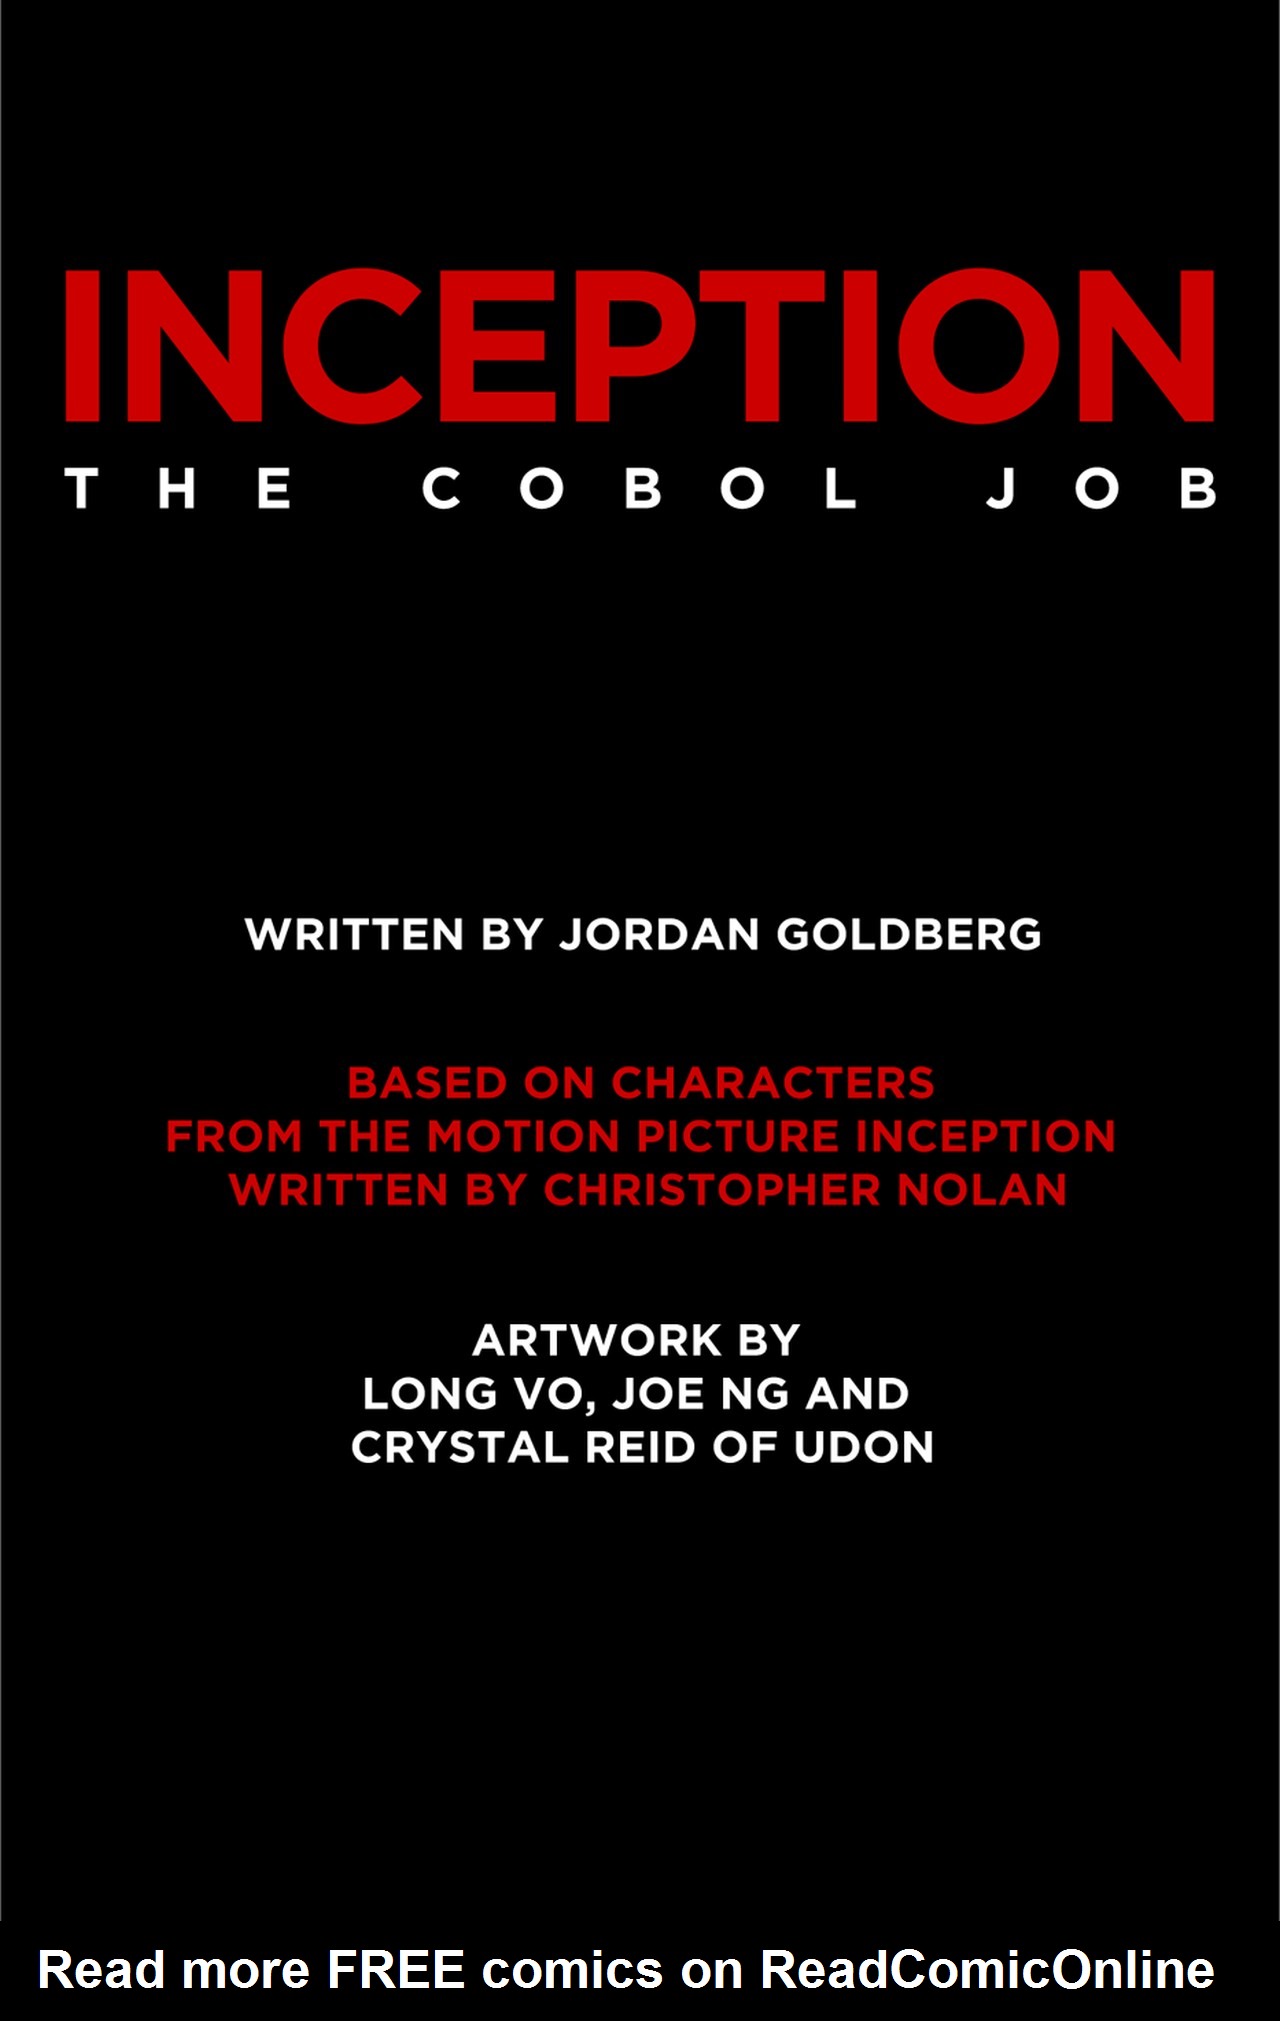 Read online Inception: The Cobol Job comic -  Issue # Full - 2